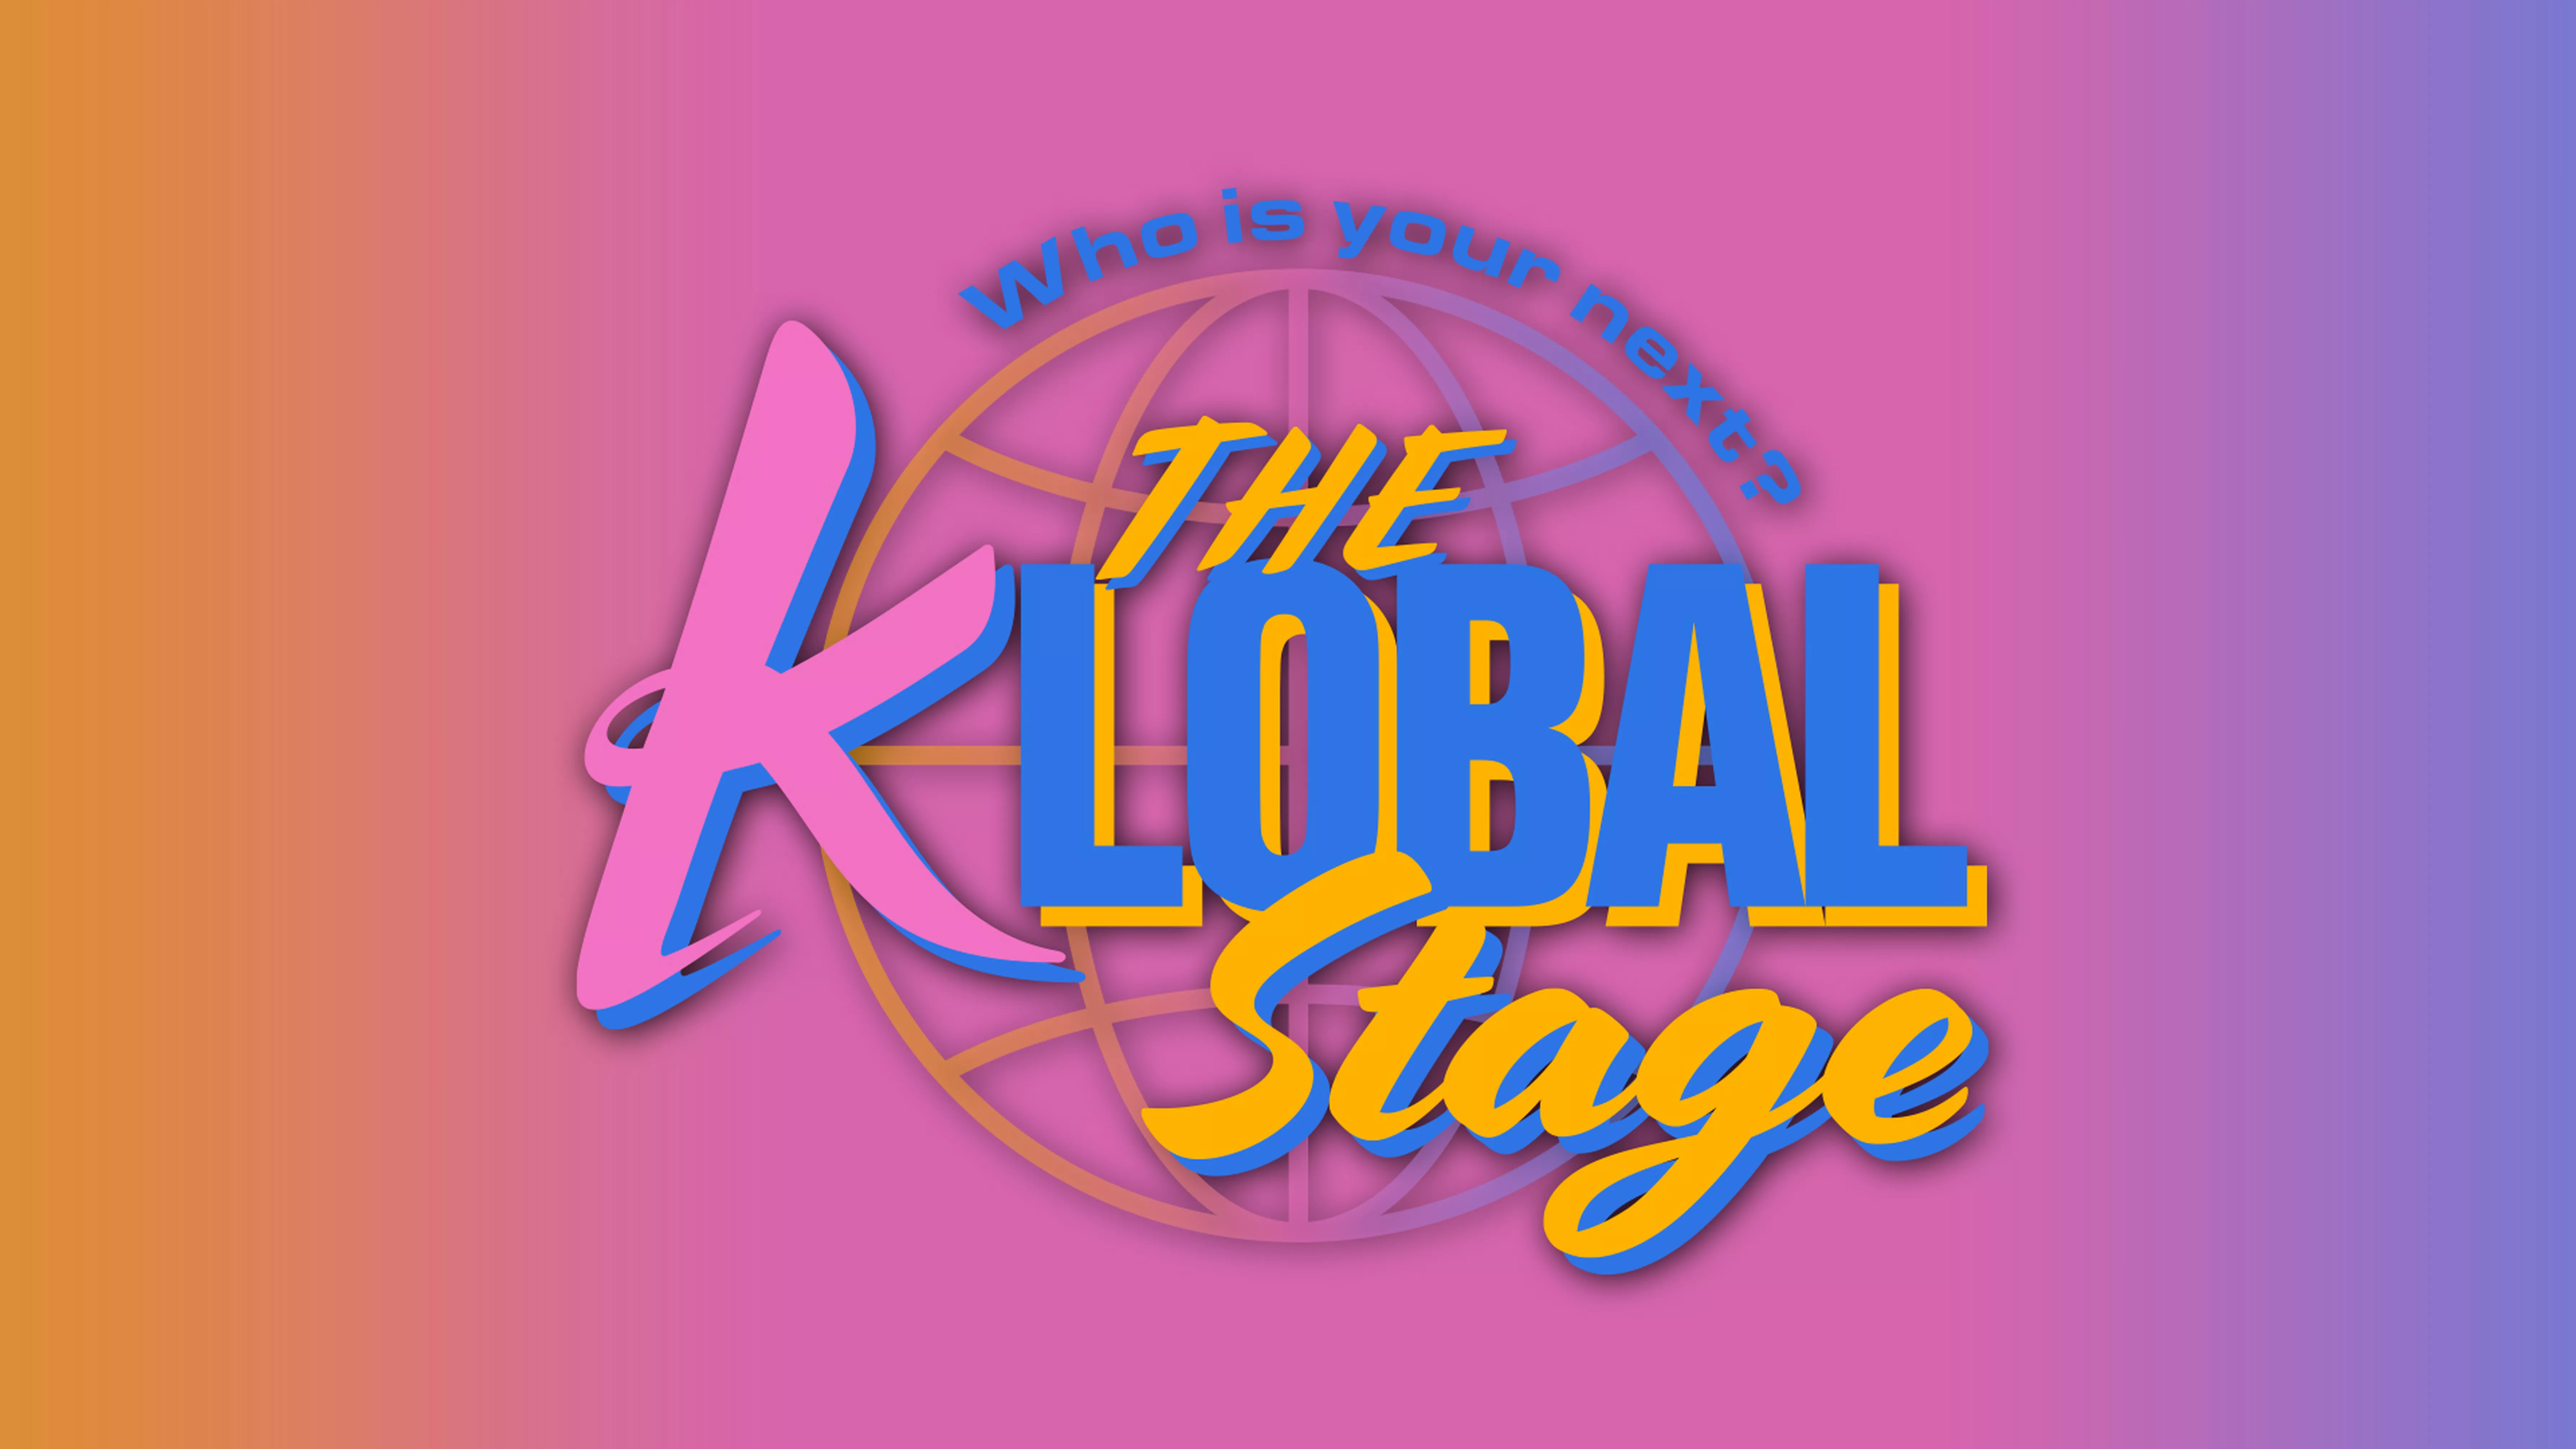 Who is your next? THE KLOBAL STAGE